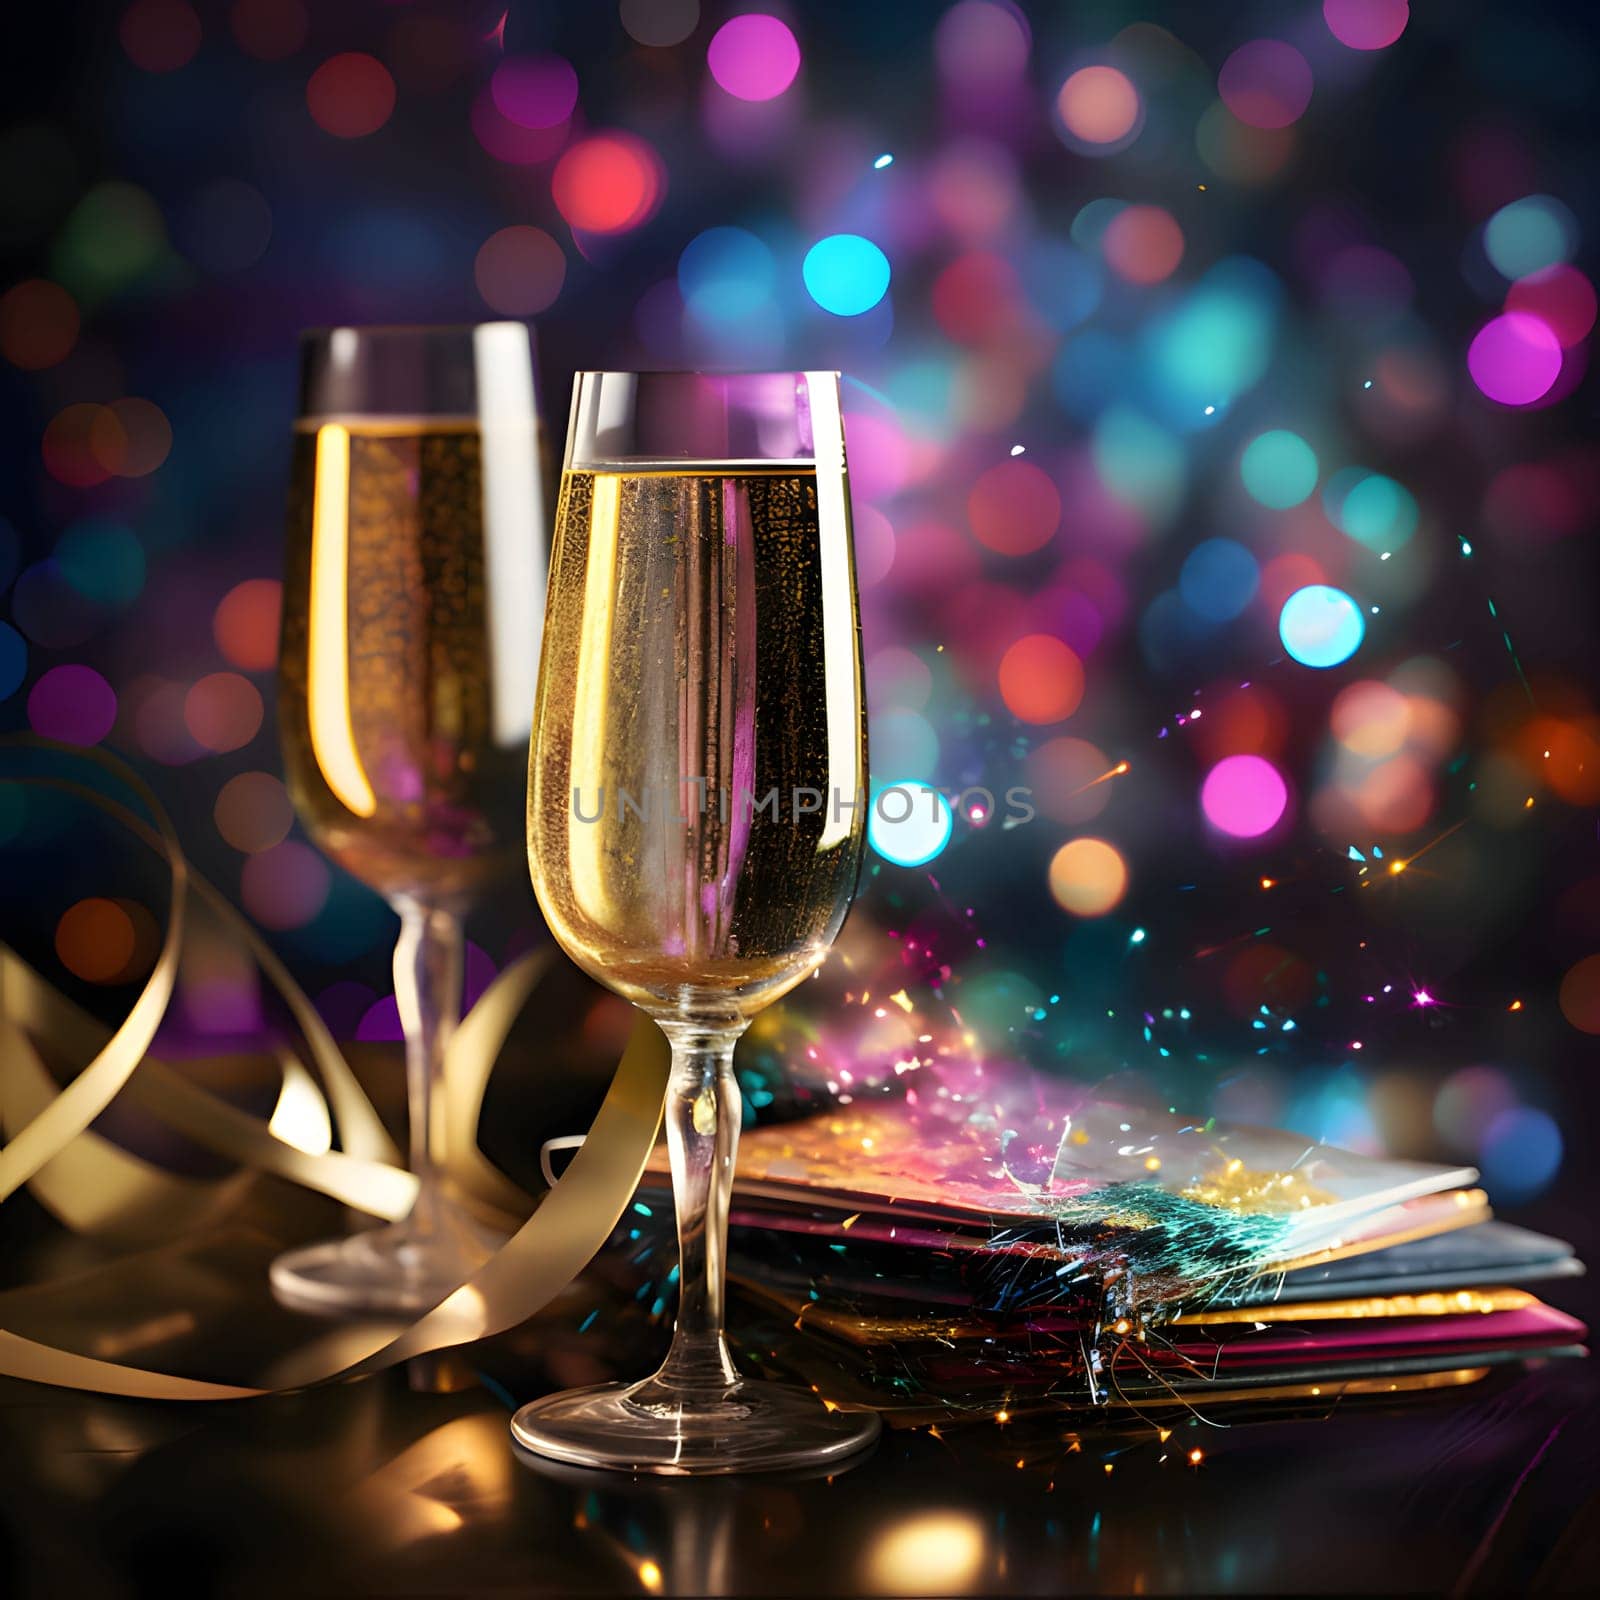 Champagne glasses with gold confetti and colorful bokeh effect in the background. New Year's fun and festivities. A time of celebration and resolutions.